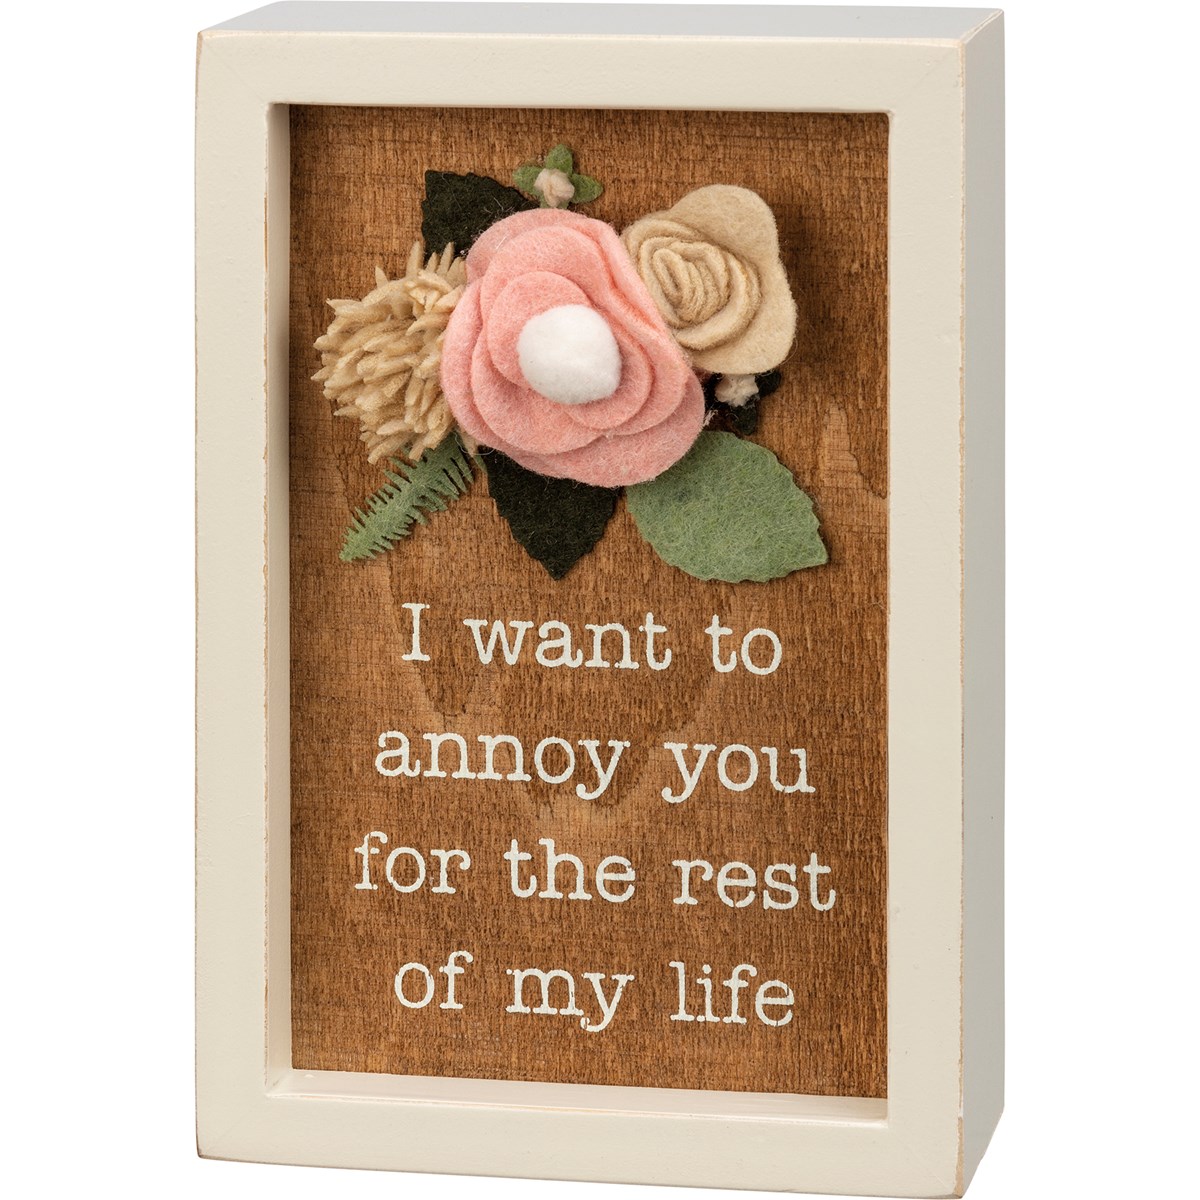 I Want To Annoy You Inset Box Sign - Wood, Felt